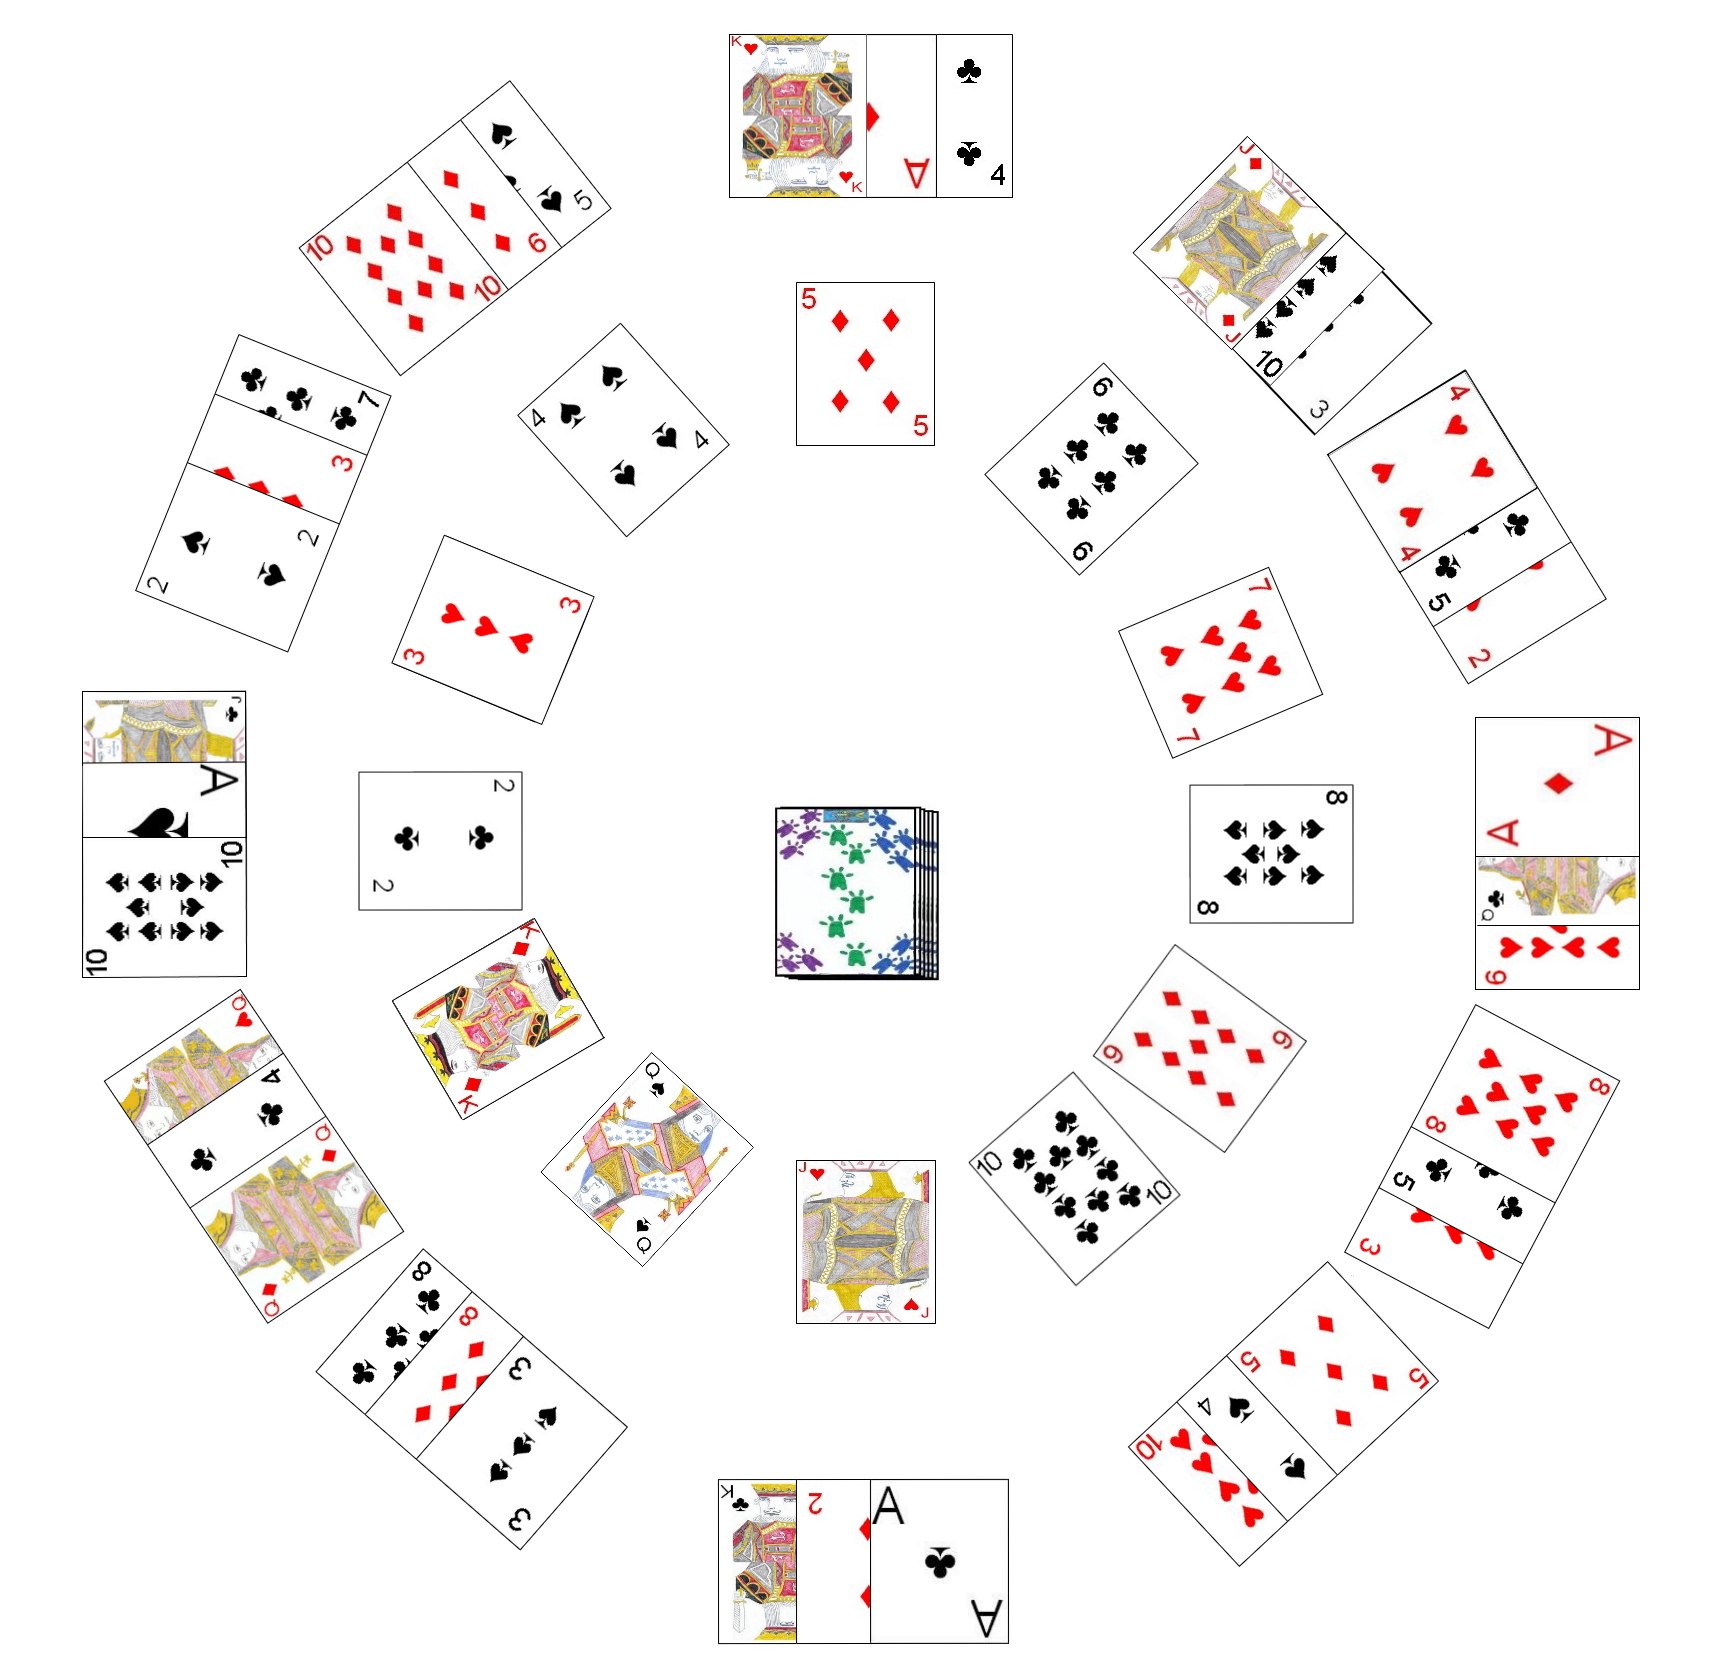 Example initial setup for Big Ben solitaire